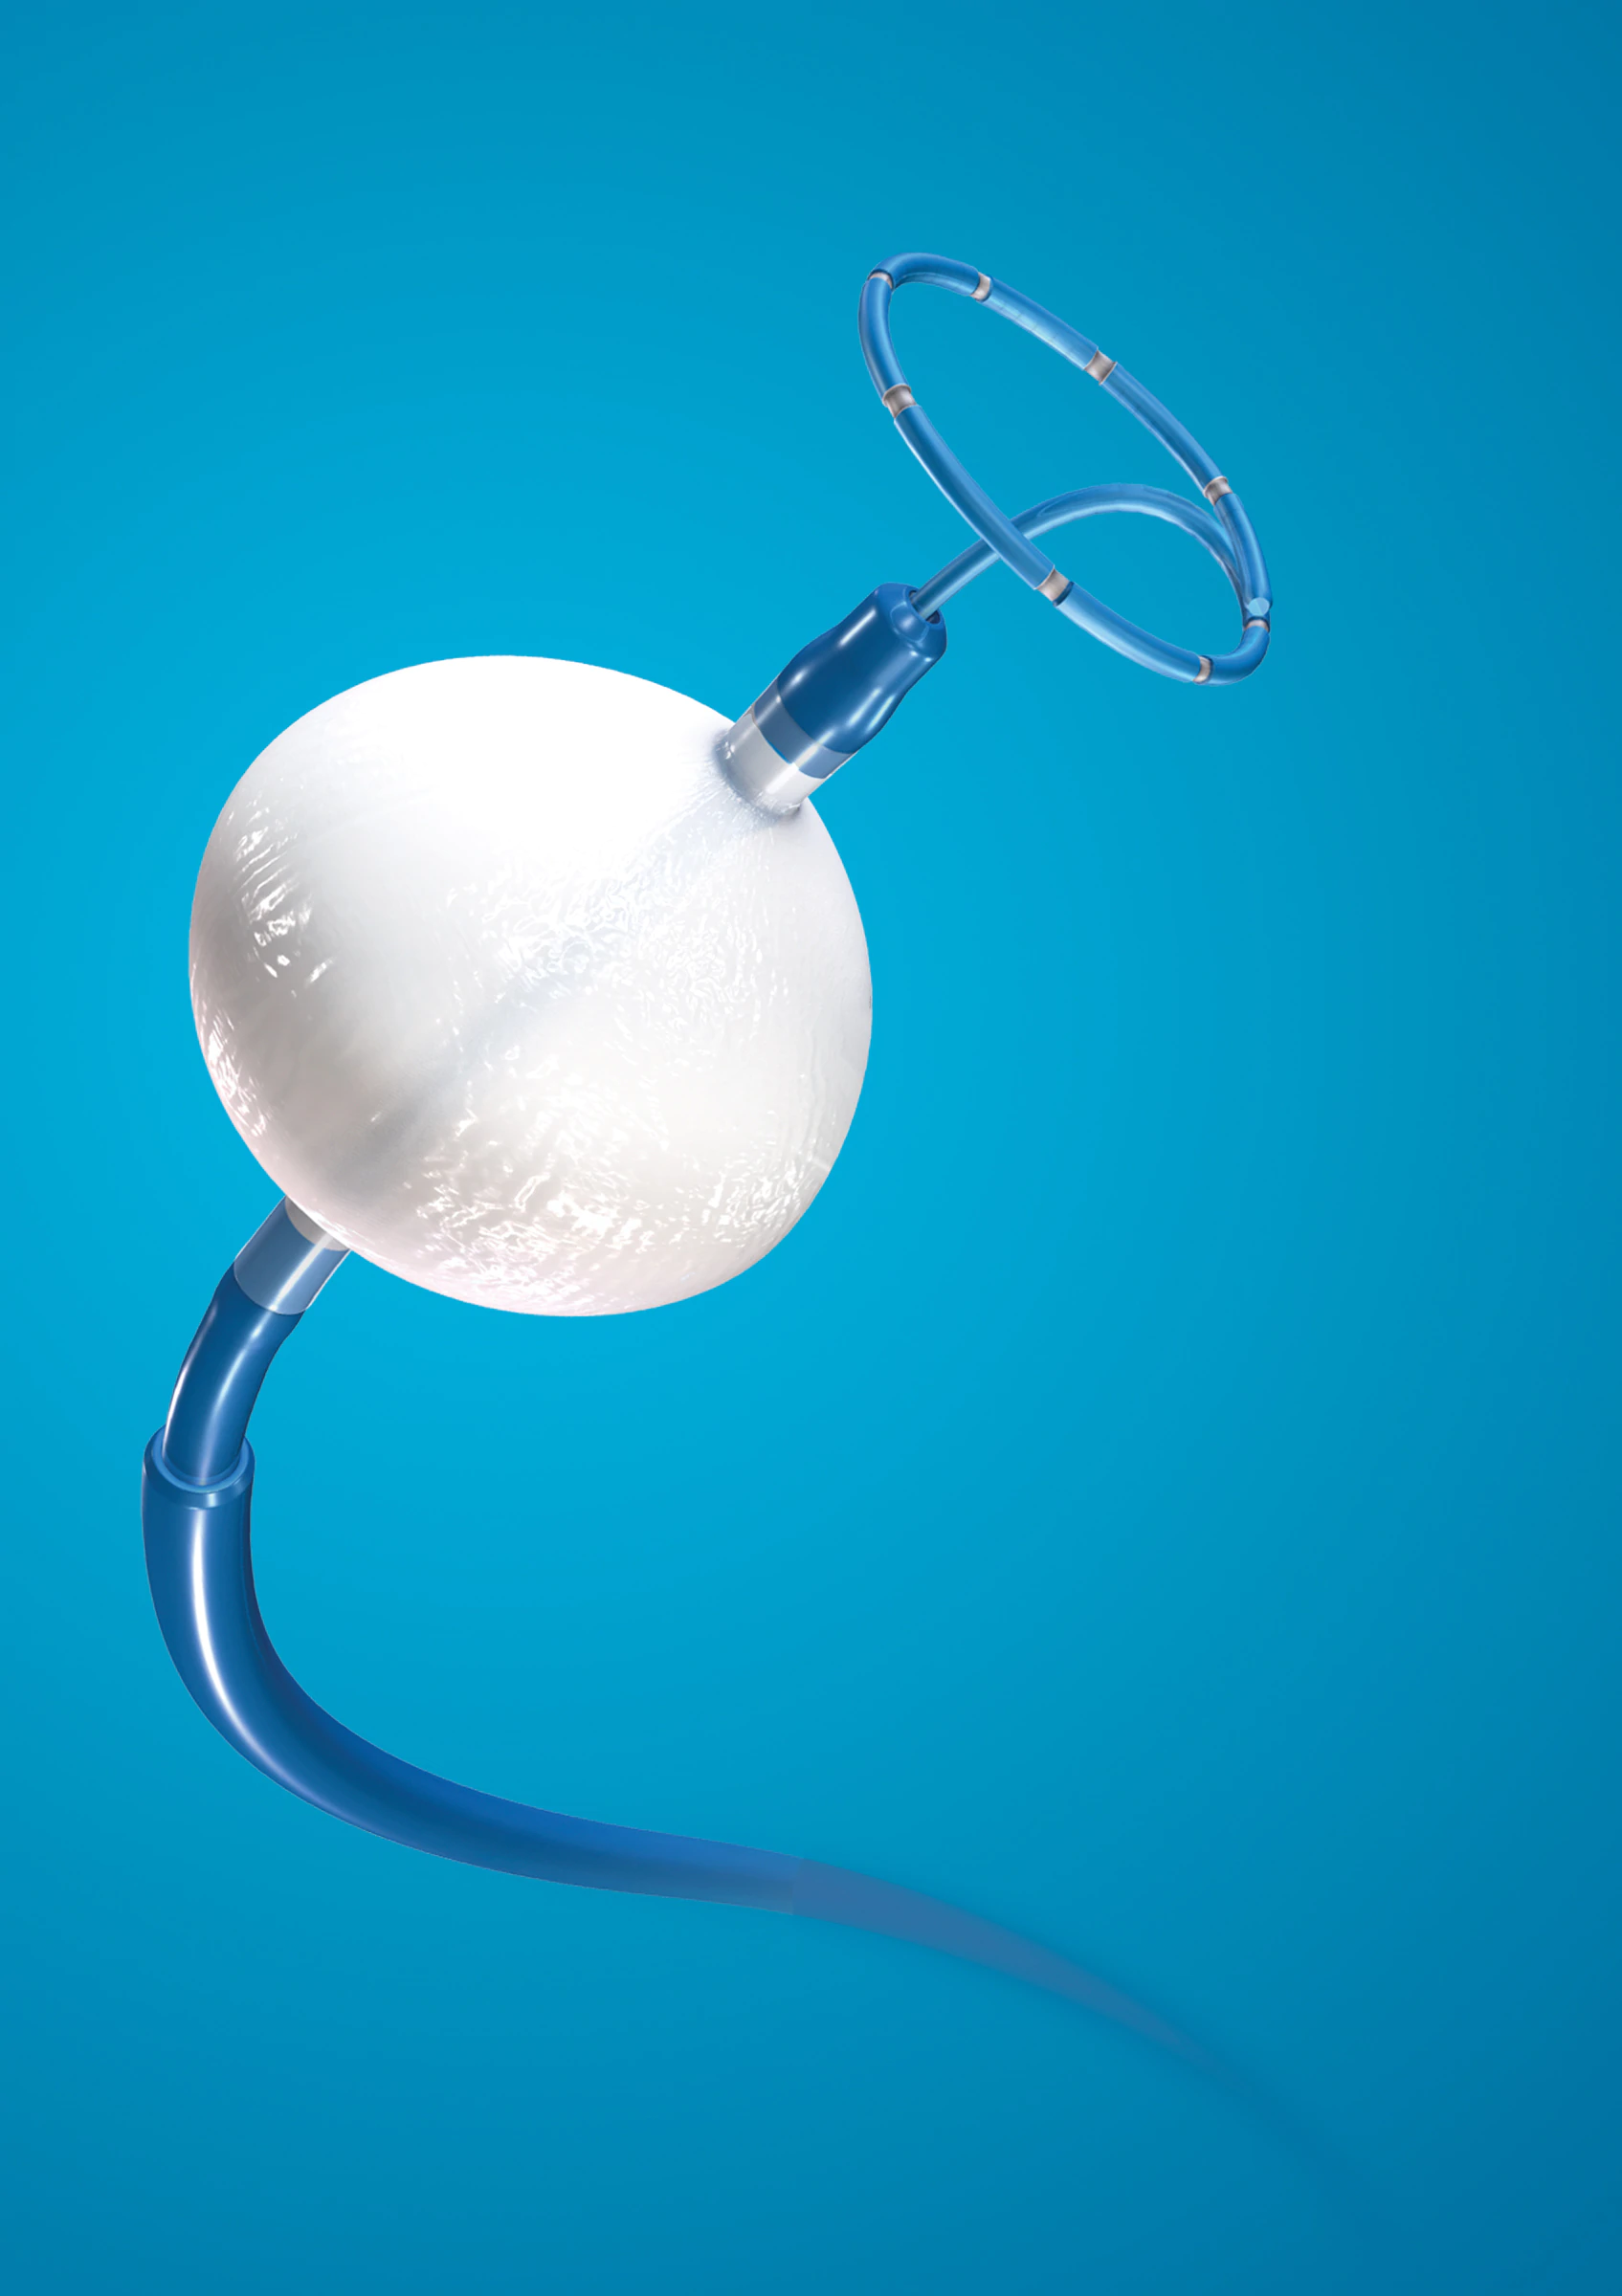 Medtronic India launches Cryoablation Catheter to treat Atrial Fibrillation patients